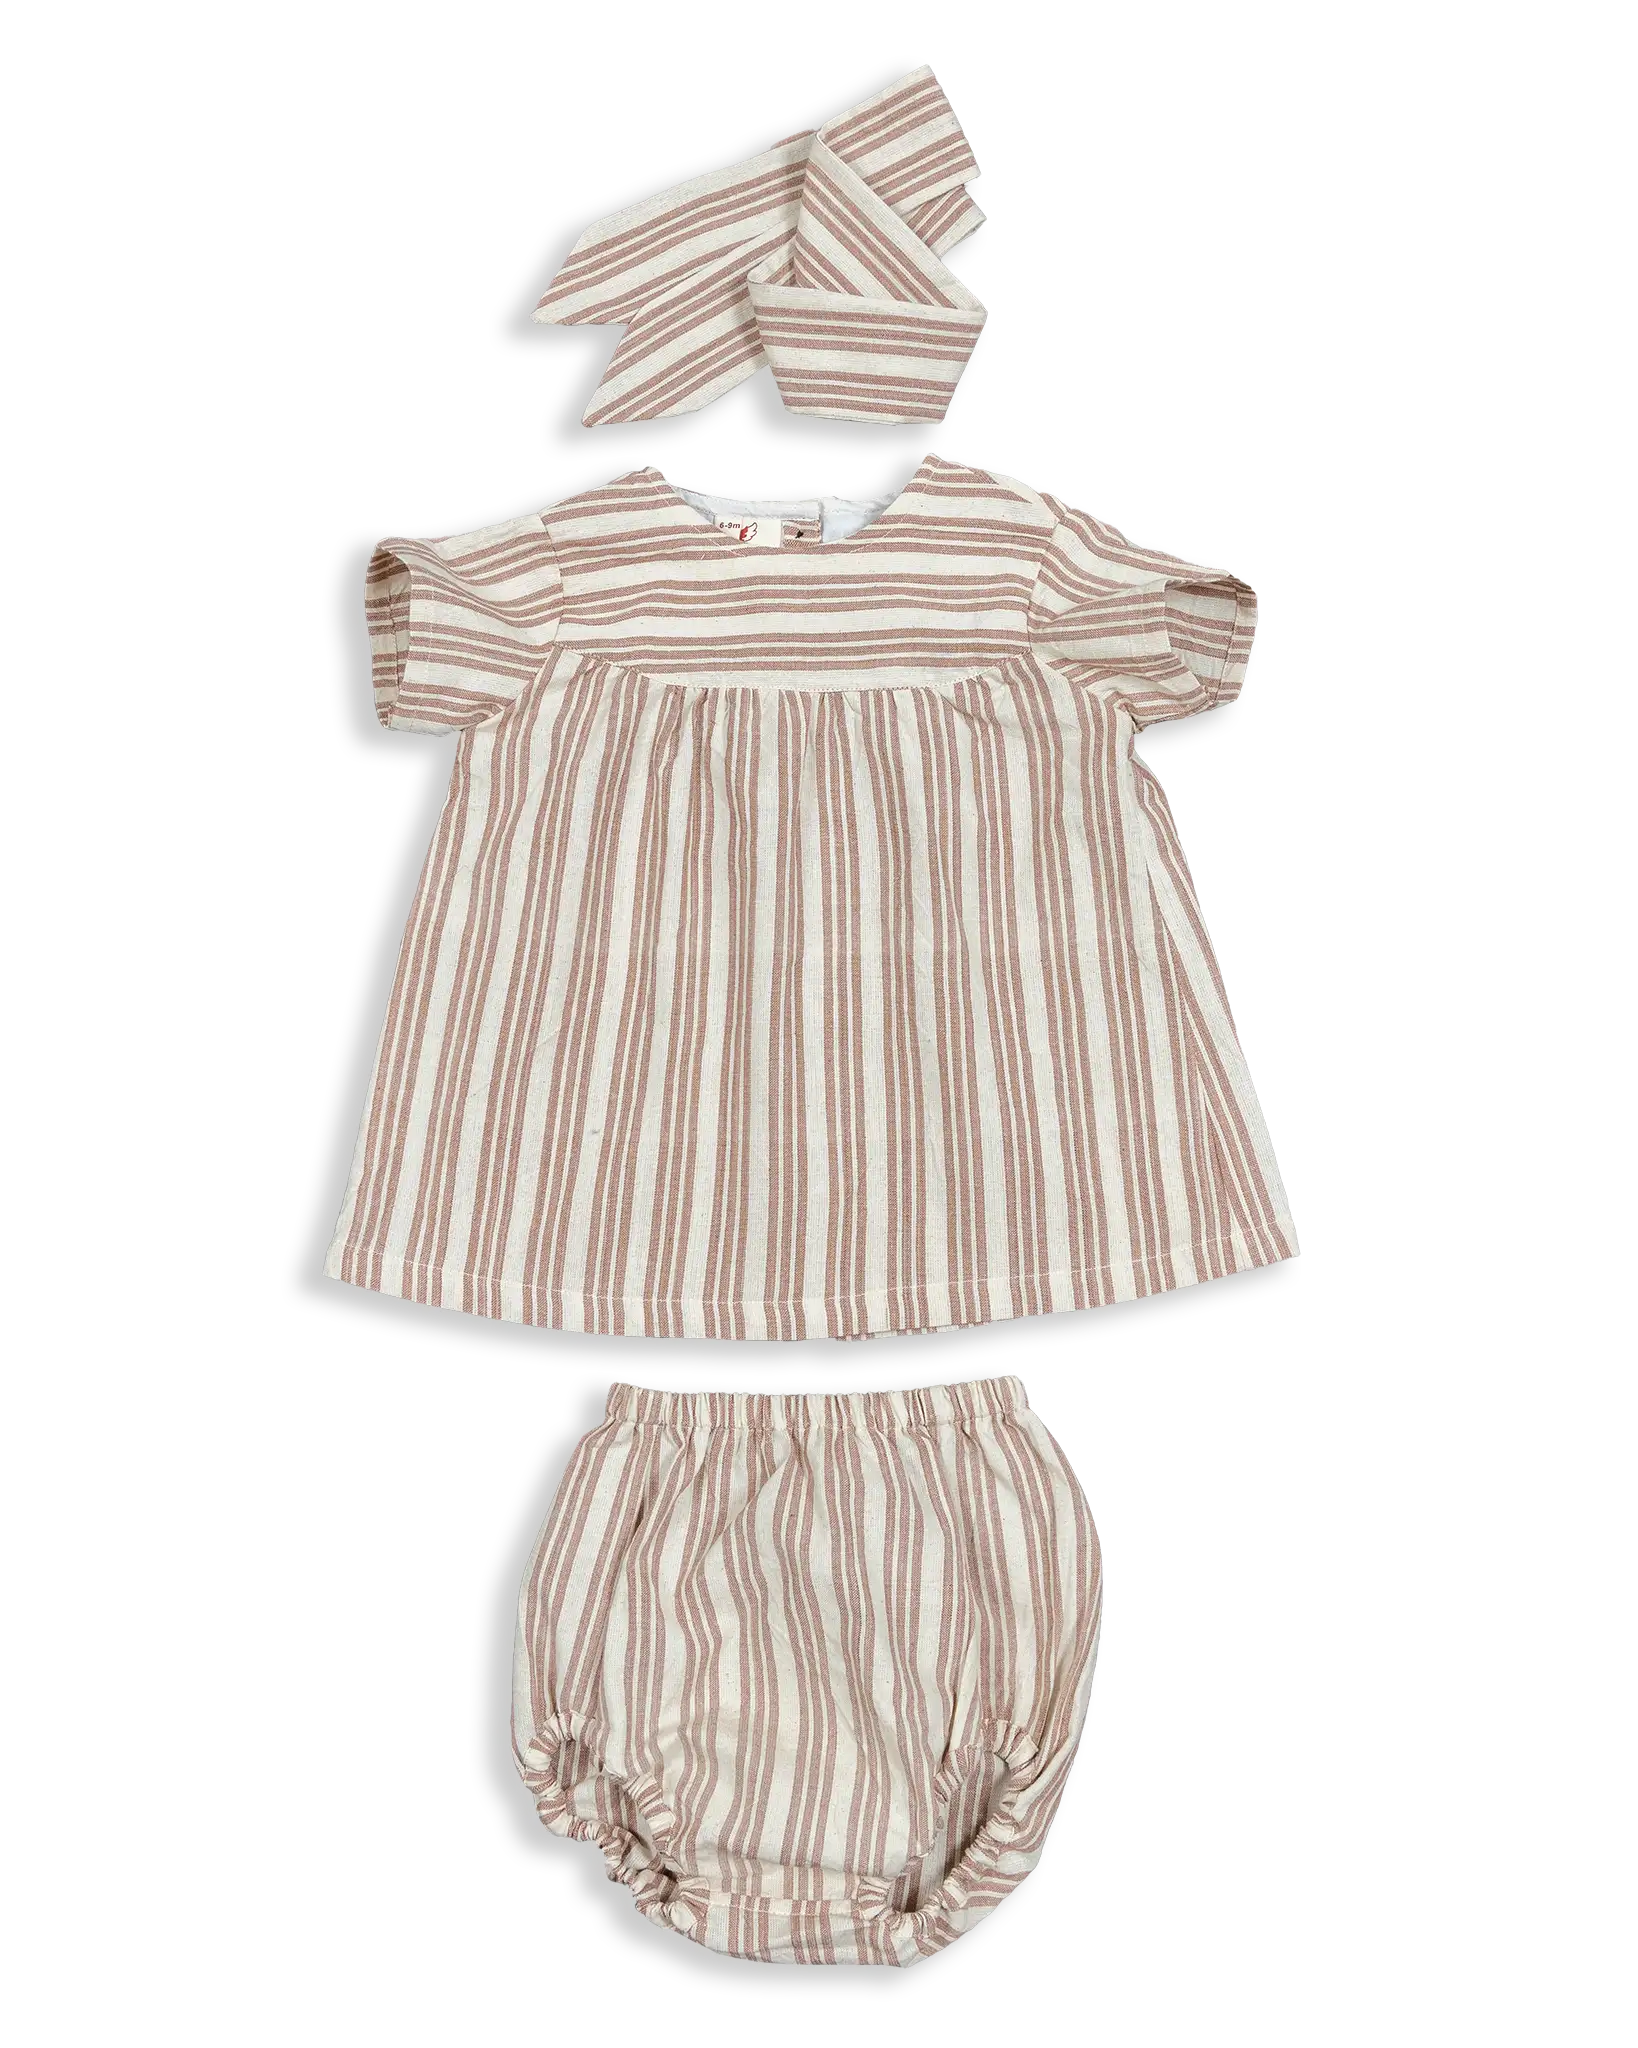 Our kids' dress sets are crafted from 100% stripe woven cotton. This adorable ensemble includes a dress, bloomer, and a stylish three-piece headband. Made with comfort and style in mind, it's the perfect outfit for your little ones.